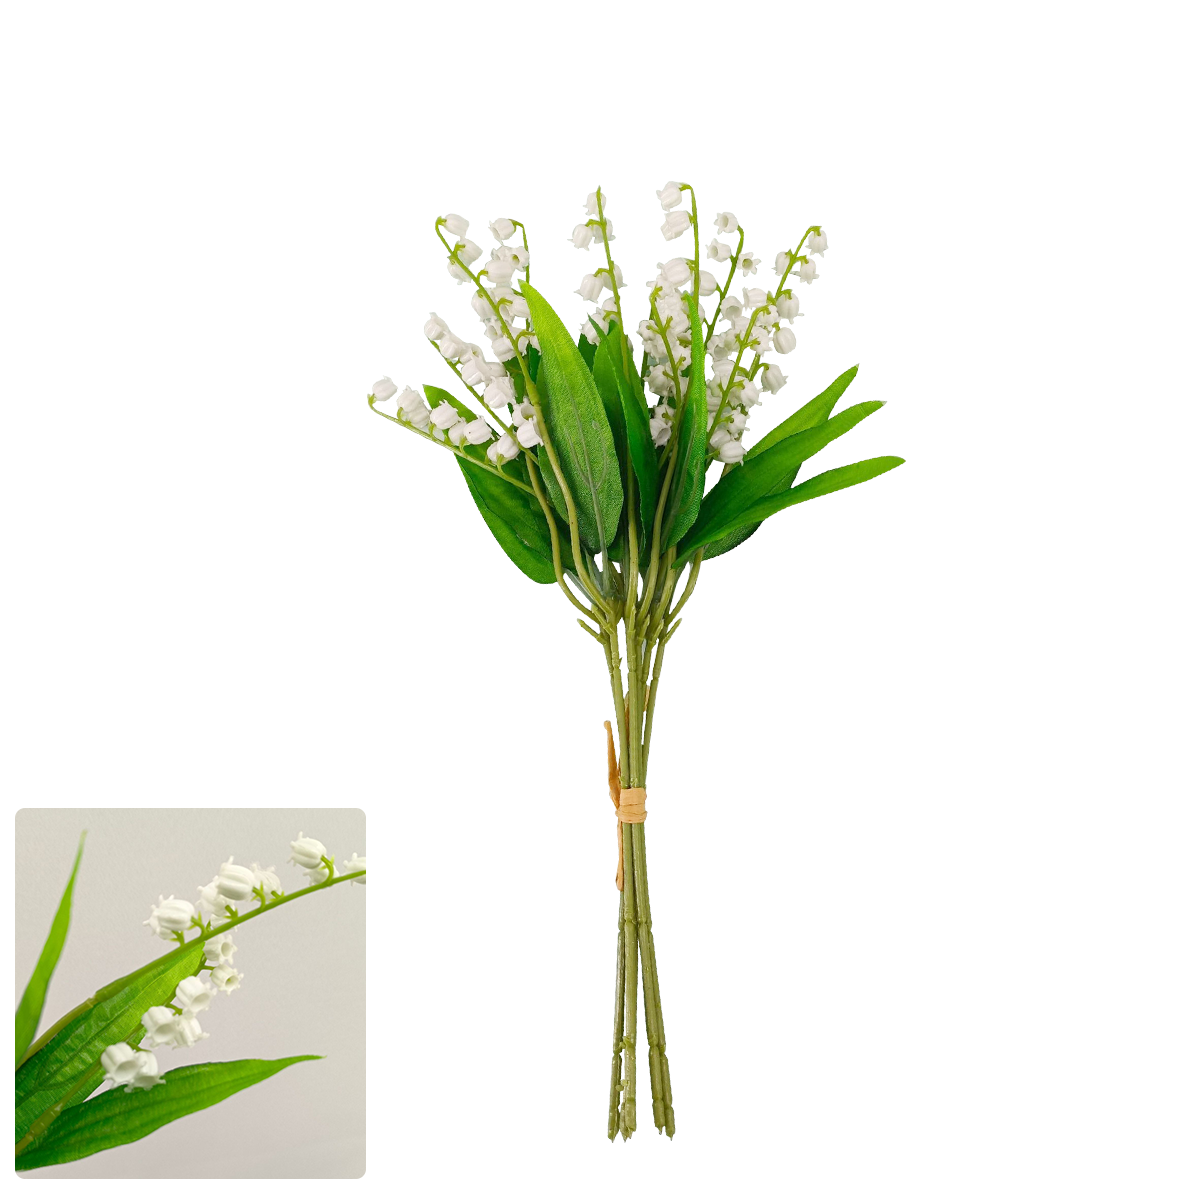 HASTHIP® 6 Bundles Artificial Flowers, Lily of The Valley Flowers Plant Faux While Flowers Wind Chime Orchid Holding Bouquet Outdoor Bridal Wedding Bouquet for Home Garden Party Decoration